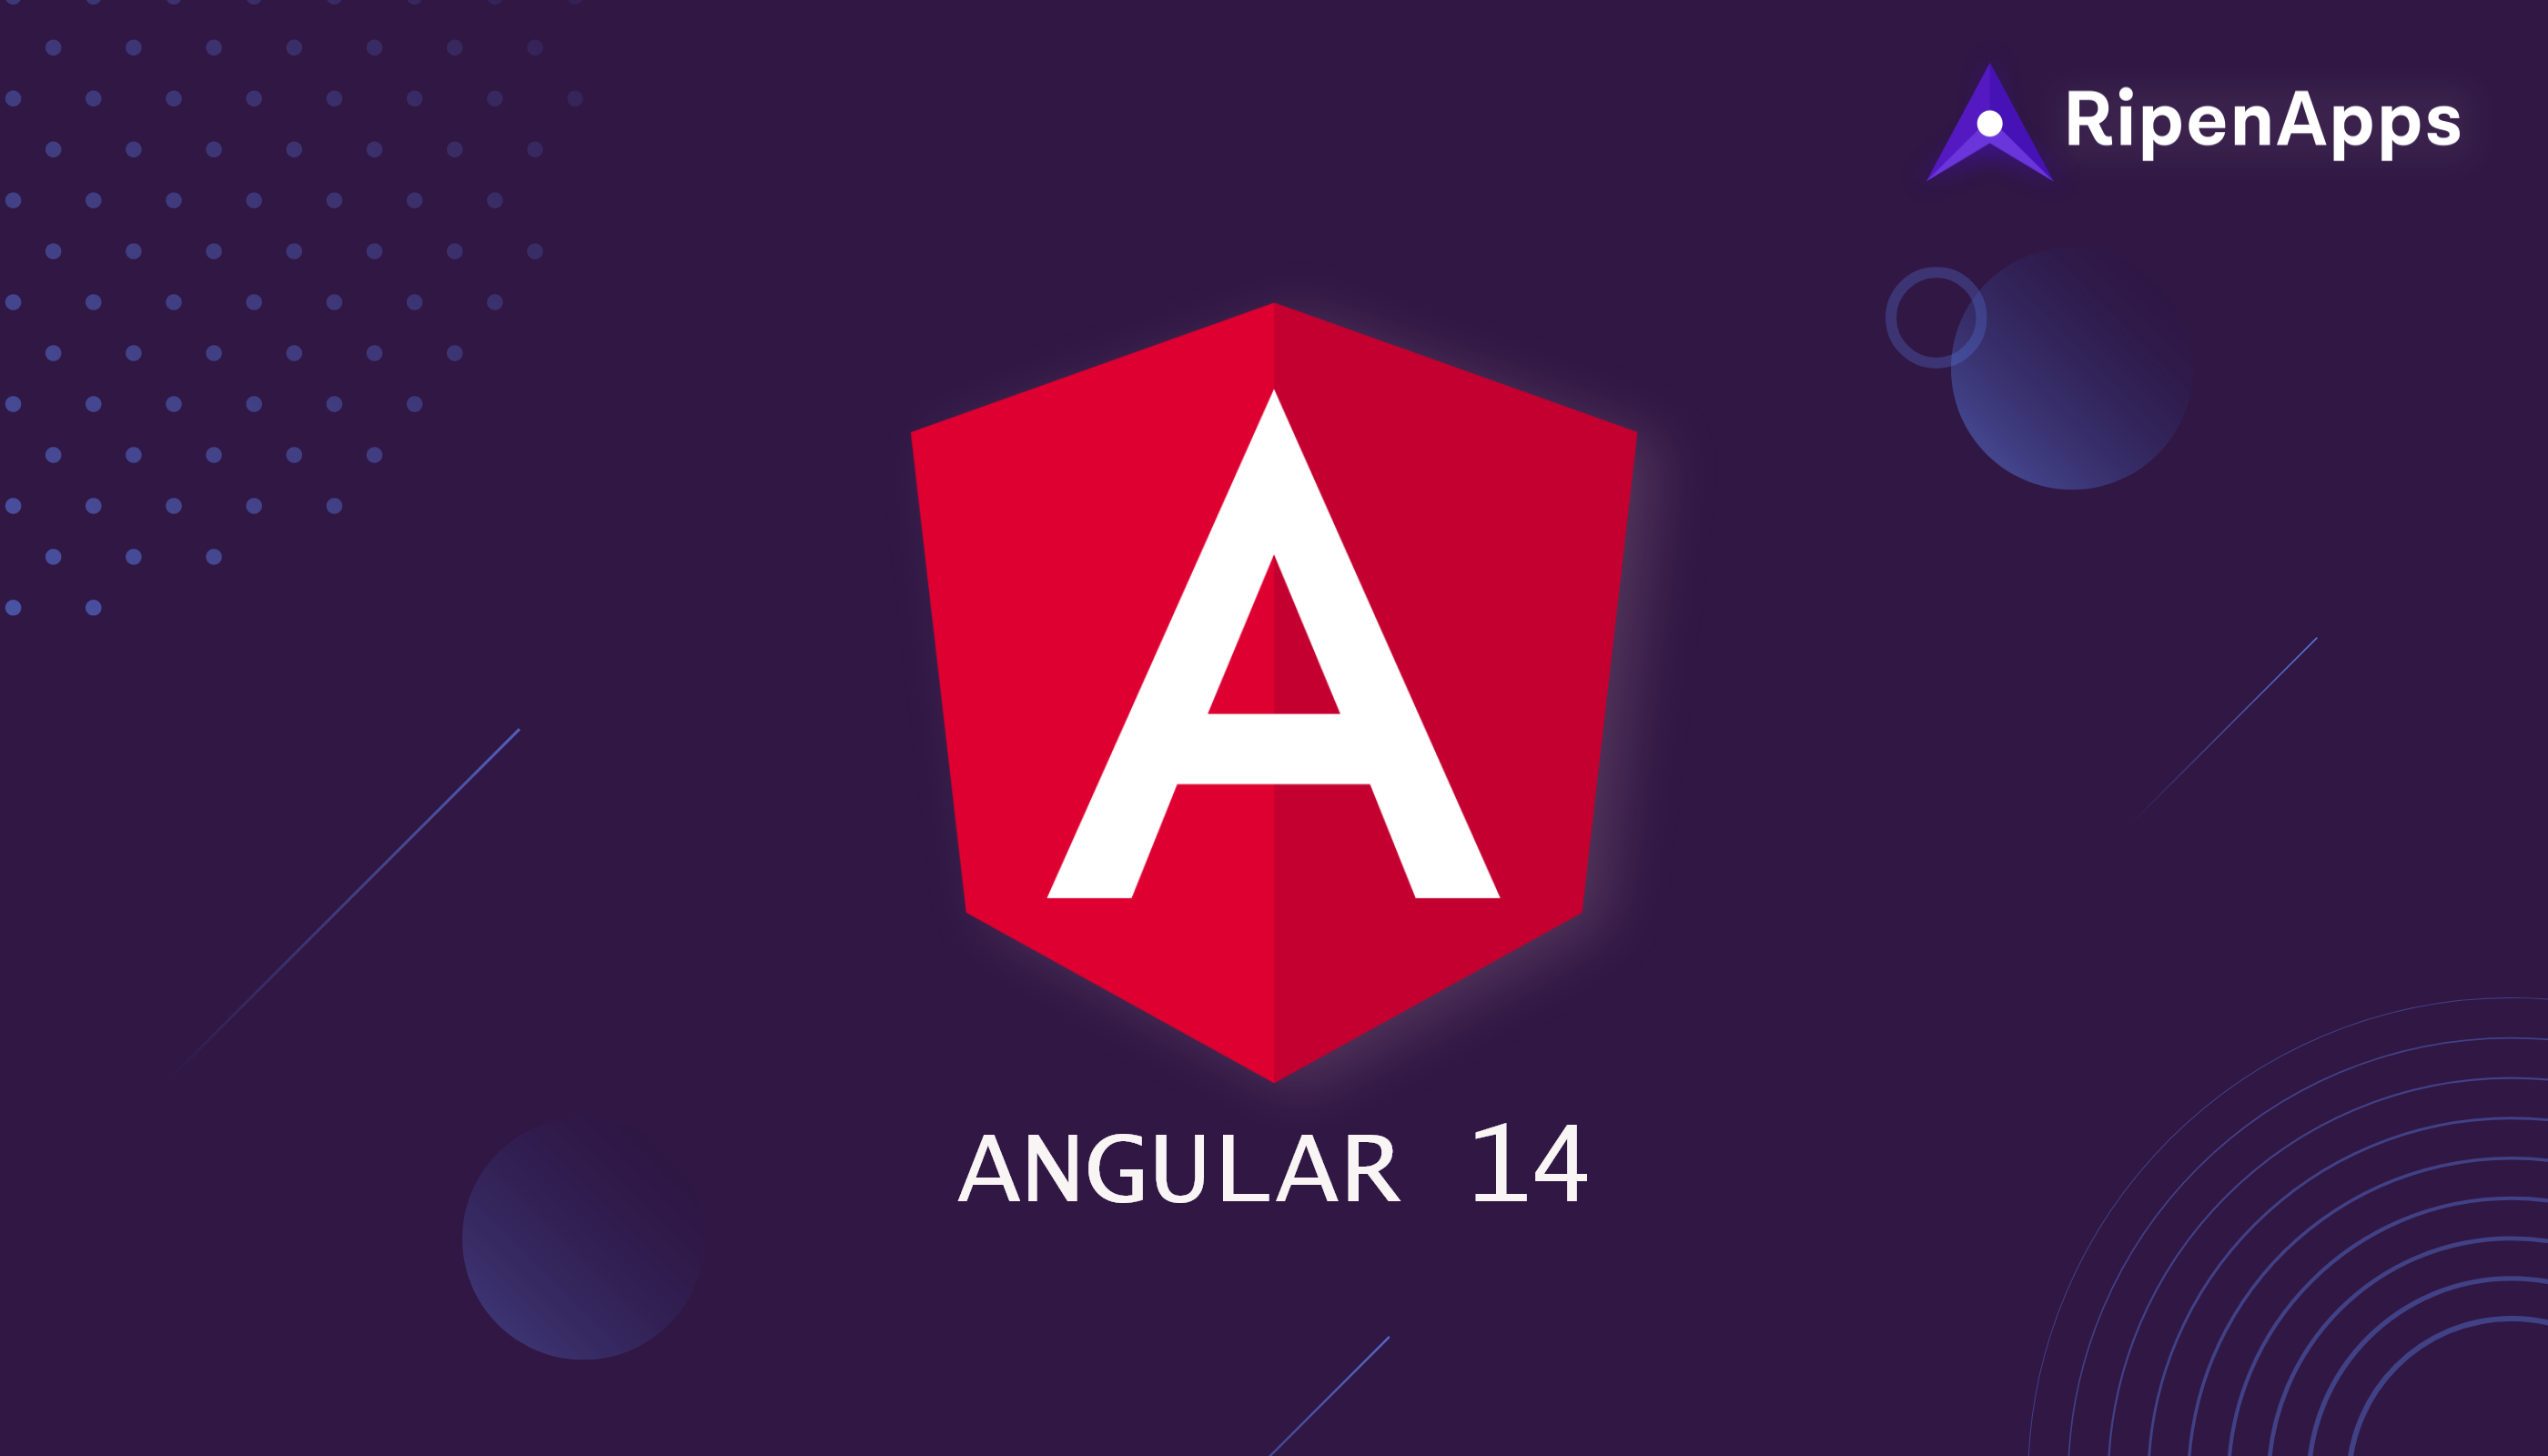 Angular 14: Find Major Features Straight from the Update